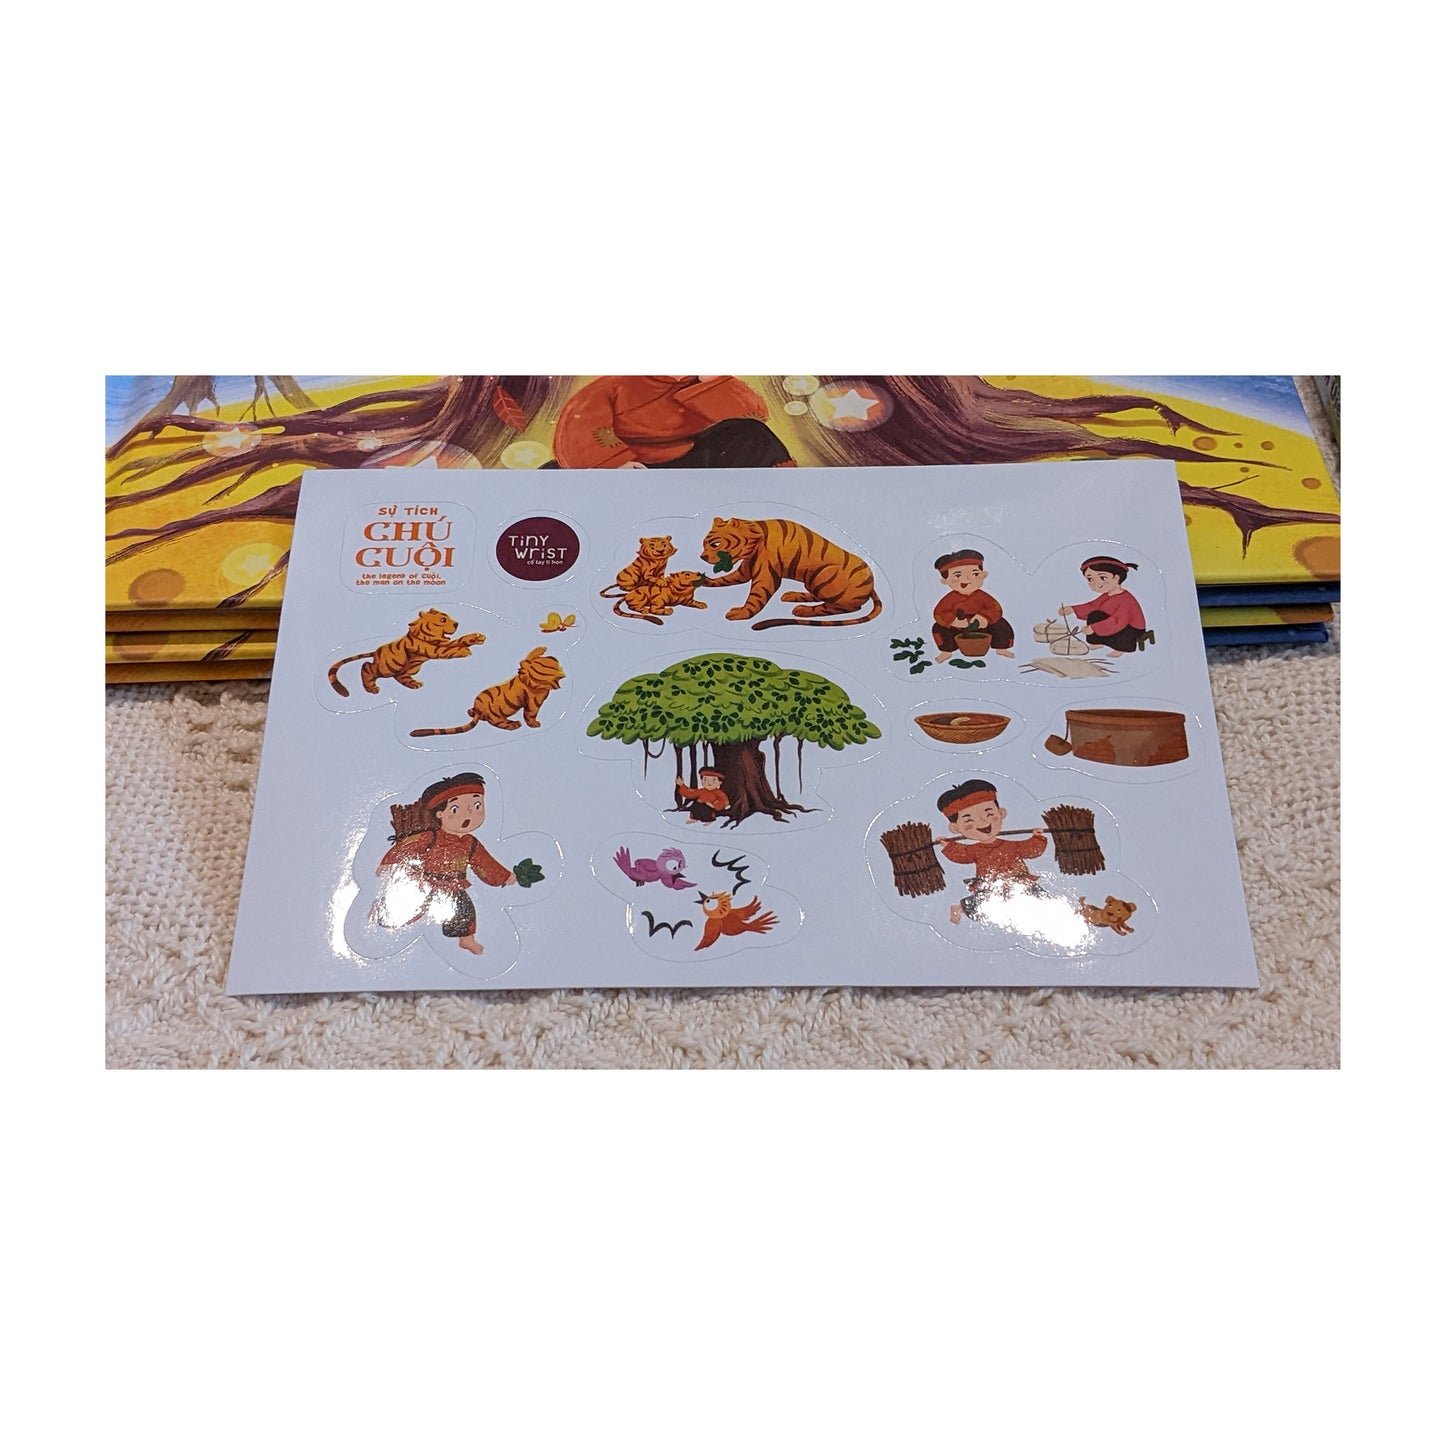 Bilingual Tiny Wrist combo: Colors of Tet + 10 Nursery Rhymes from Vietnam + Legend of Cuoi